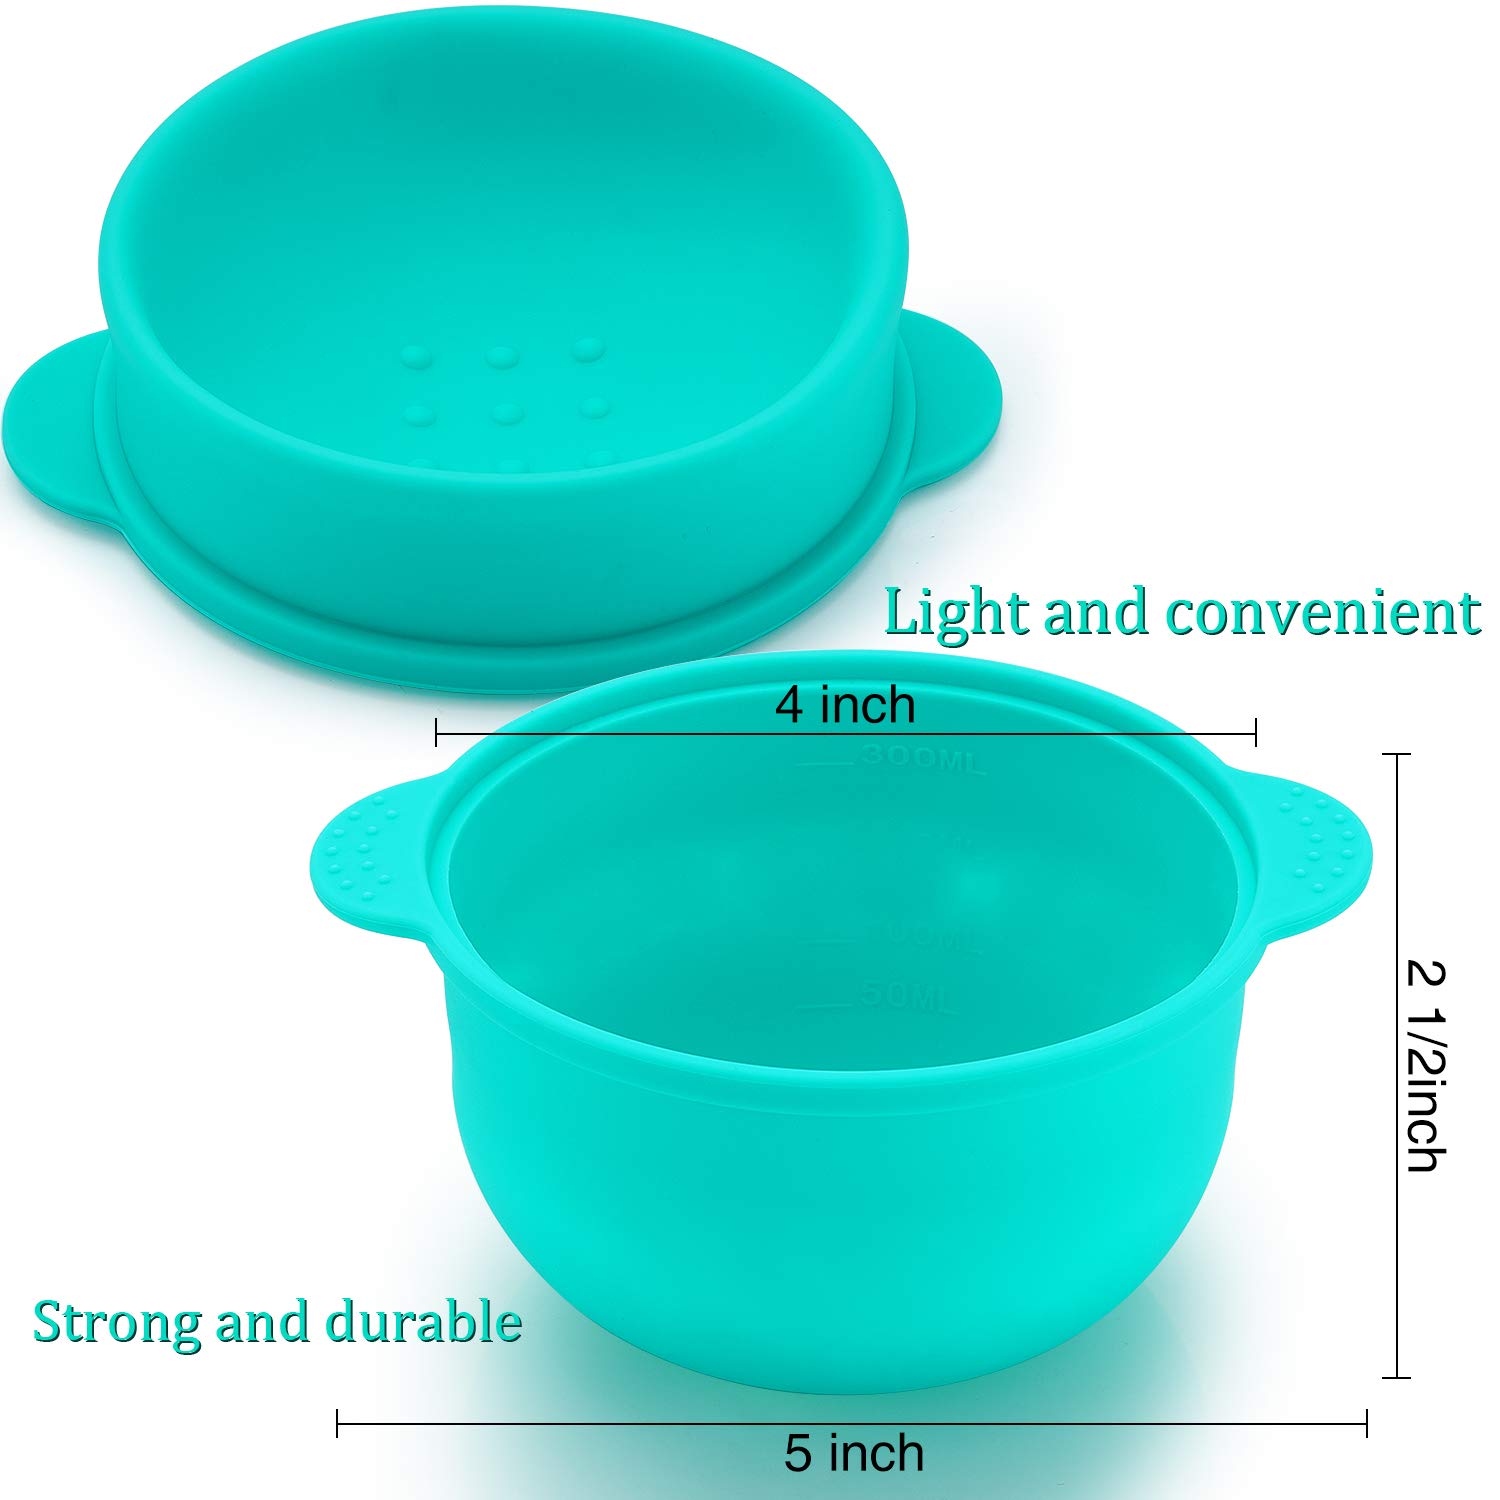 2 Pieces Wax Warmer Replacement Pot Removable Silicone Pot Hair Removal Waxing Bowl for Hair Remover Machine Home Waxing Amlessory, 500 ml,14 oz (Green)